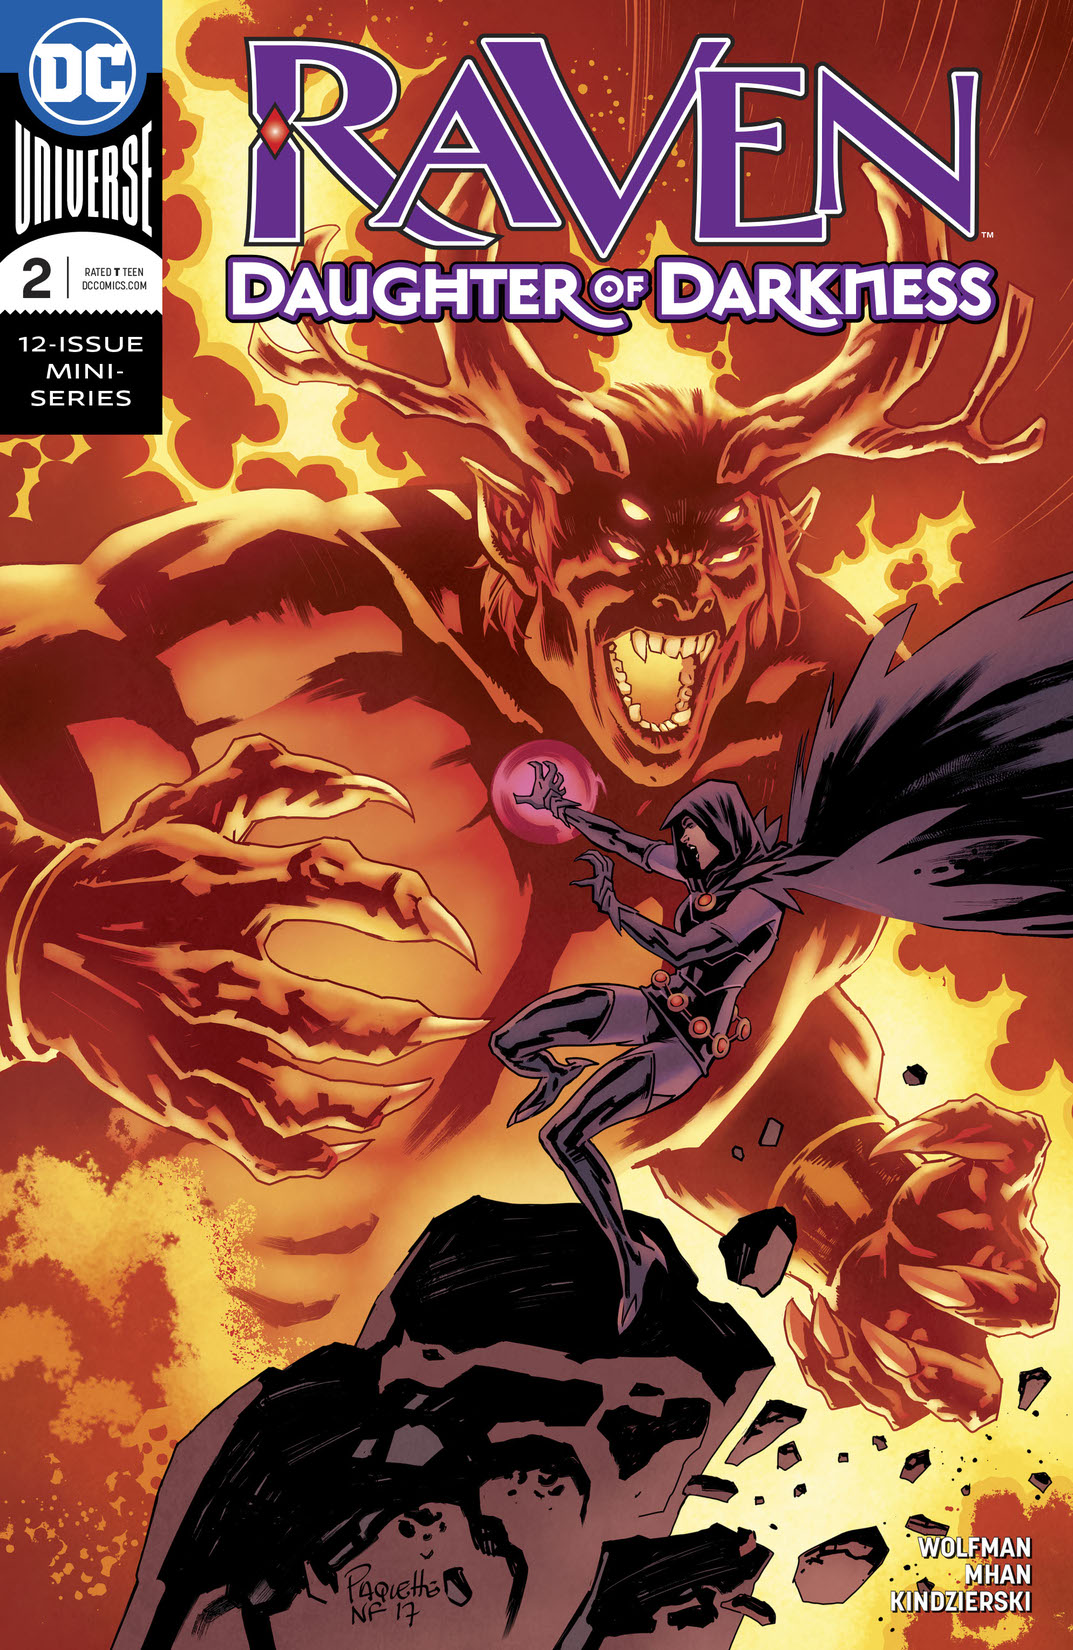 Raven: Daughter of Darkness #2 preview images